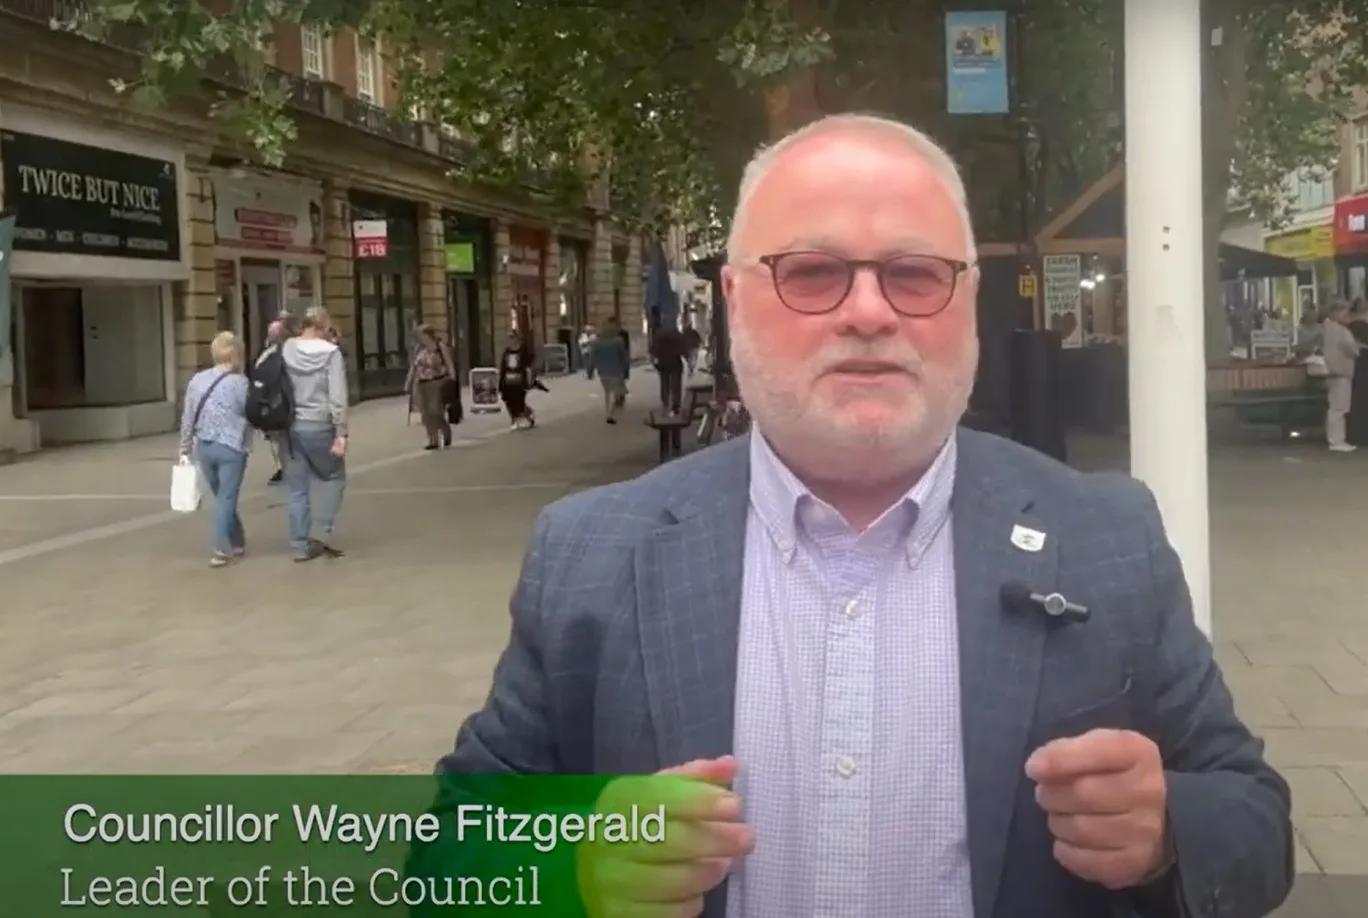 Councillor Wayne Fitzgerald, leader of the council, said: “We’ve come a long way in the past year and moved closer to securing the council’s finances long-term.”